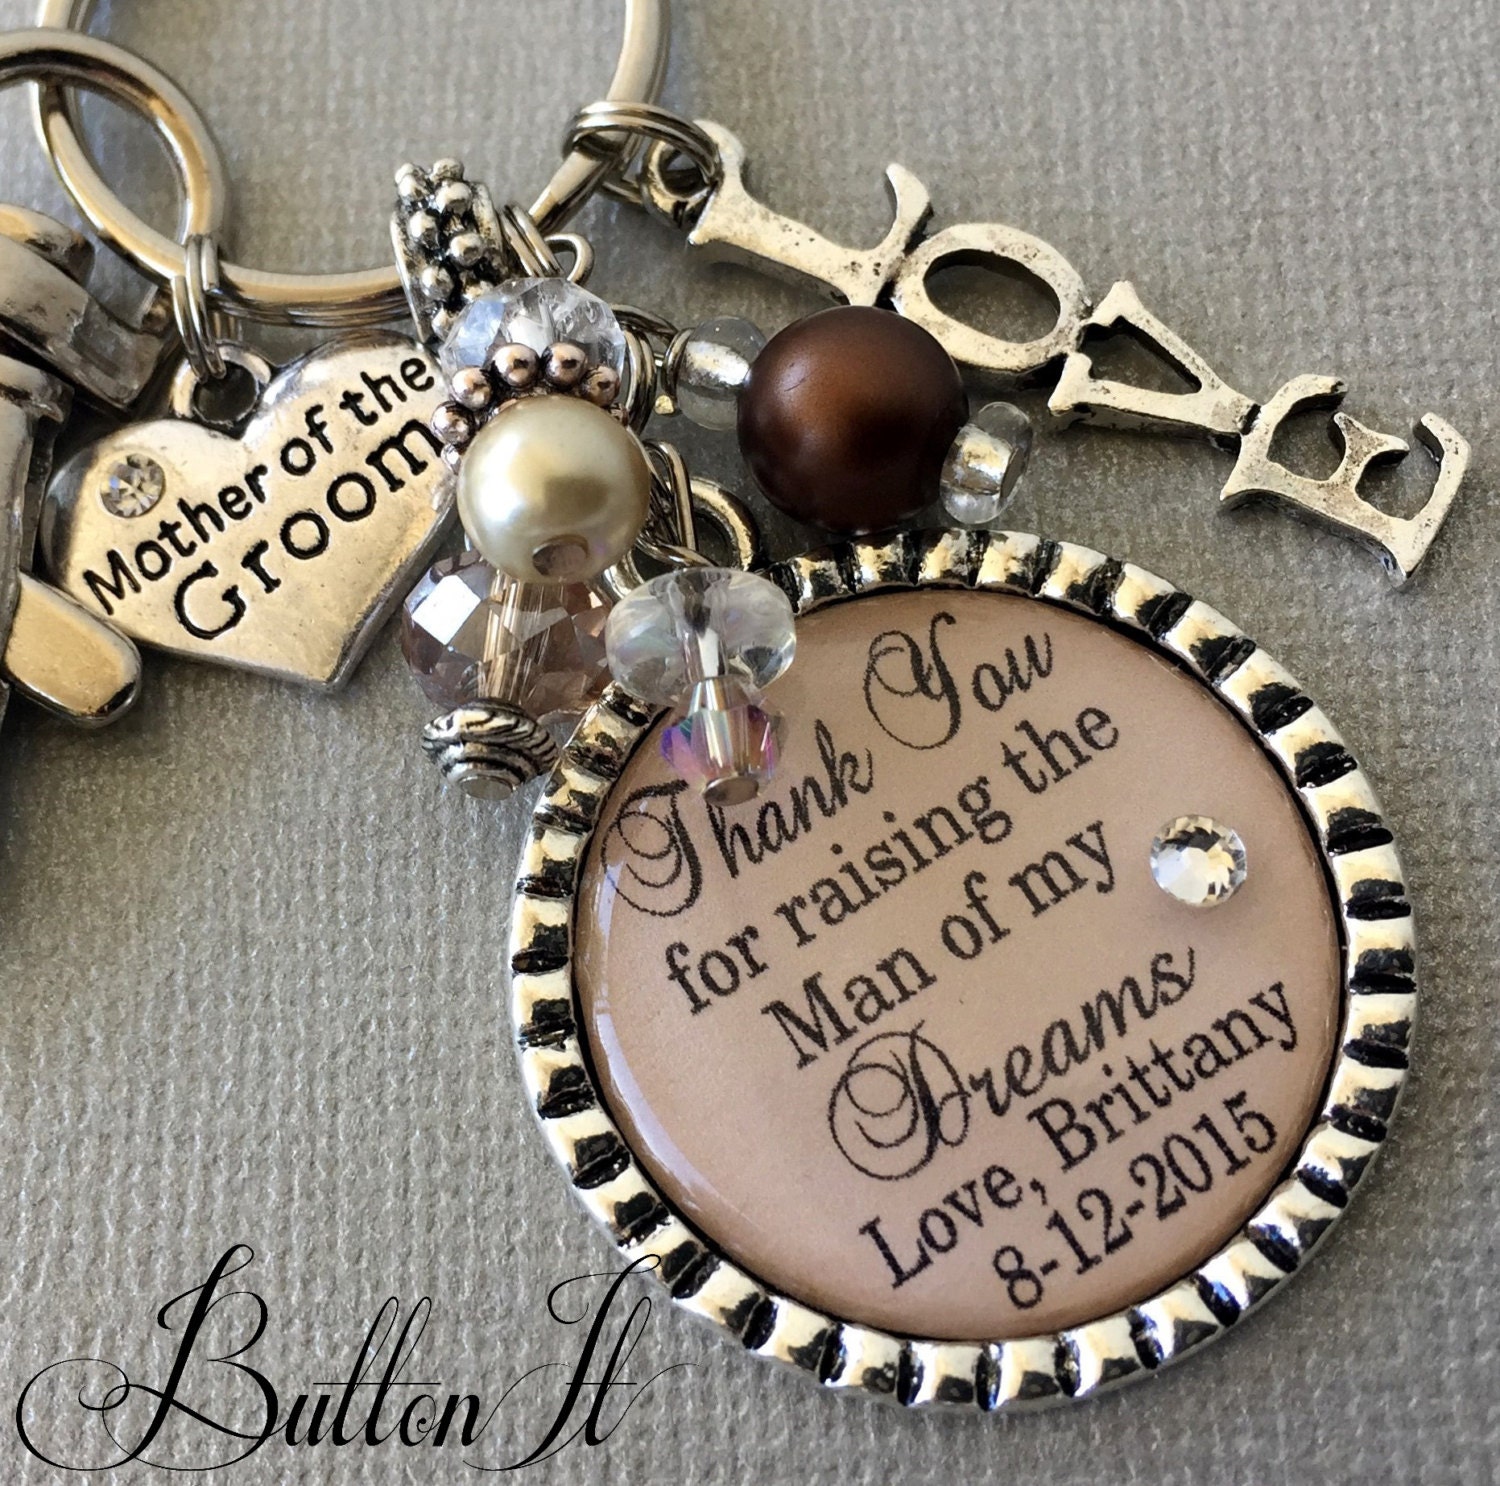 MOTHER of the GROOM gift mother of bride PERSONALIZED